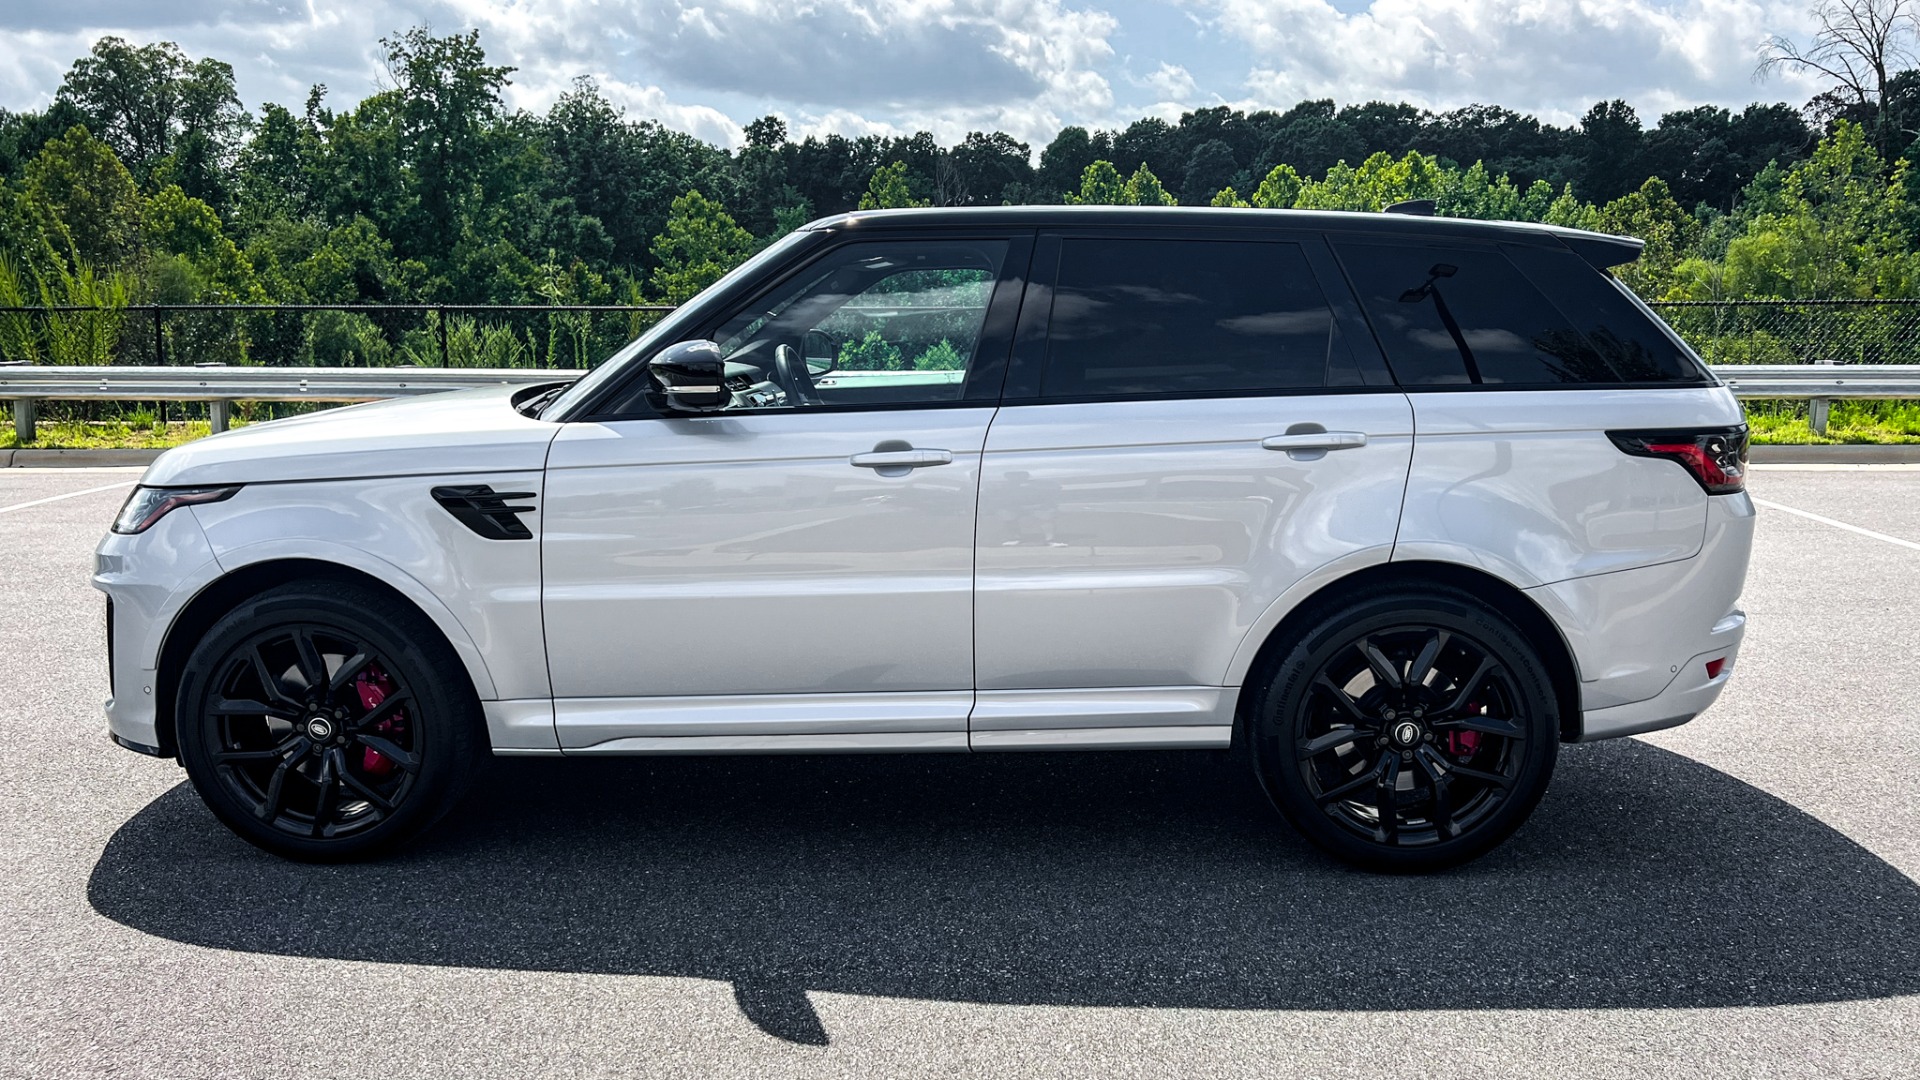 Used 2018 Land Rover Range Rover Sport SVR / SVO ULTRA METALLIC PAINT / MERIDIAN SIGNATURE / 22IN WHEELS for sale $99,995 at Formula Imports in Charlotte NC 28227 8